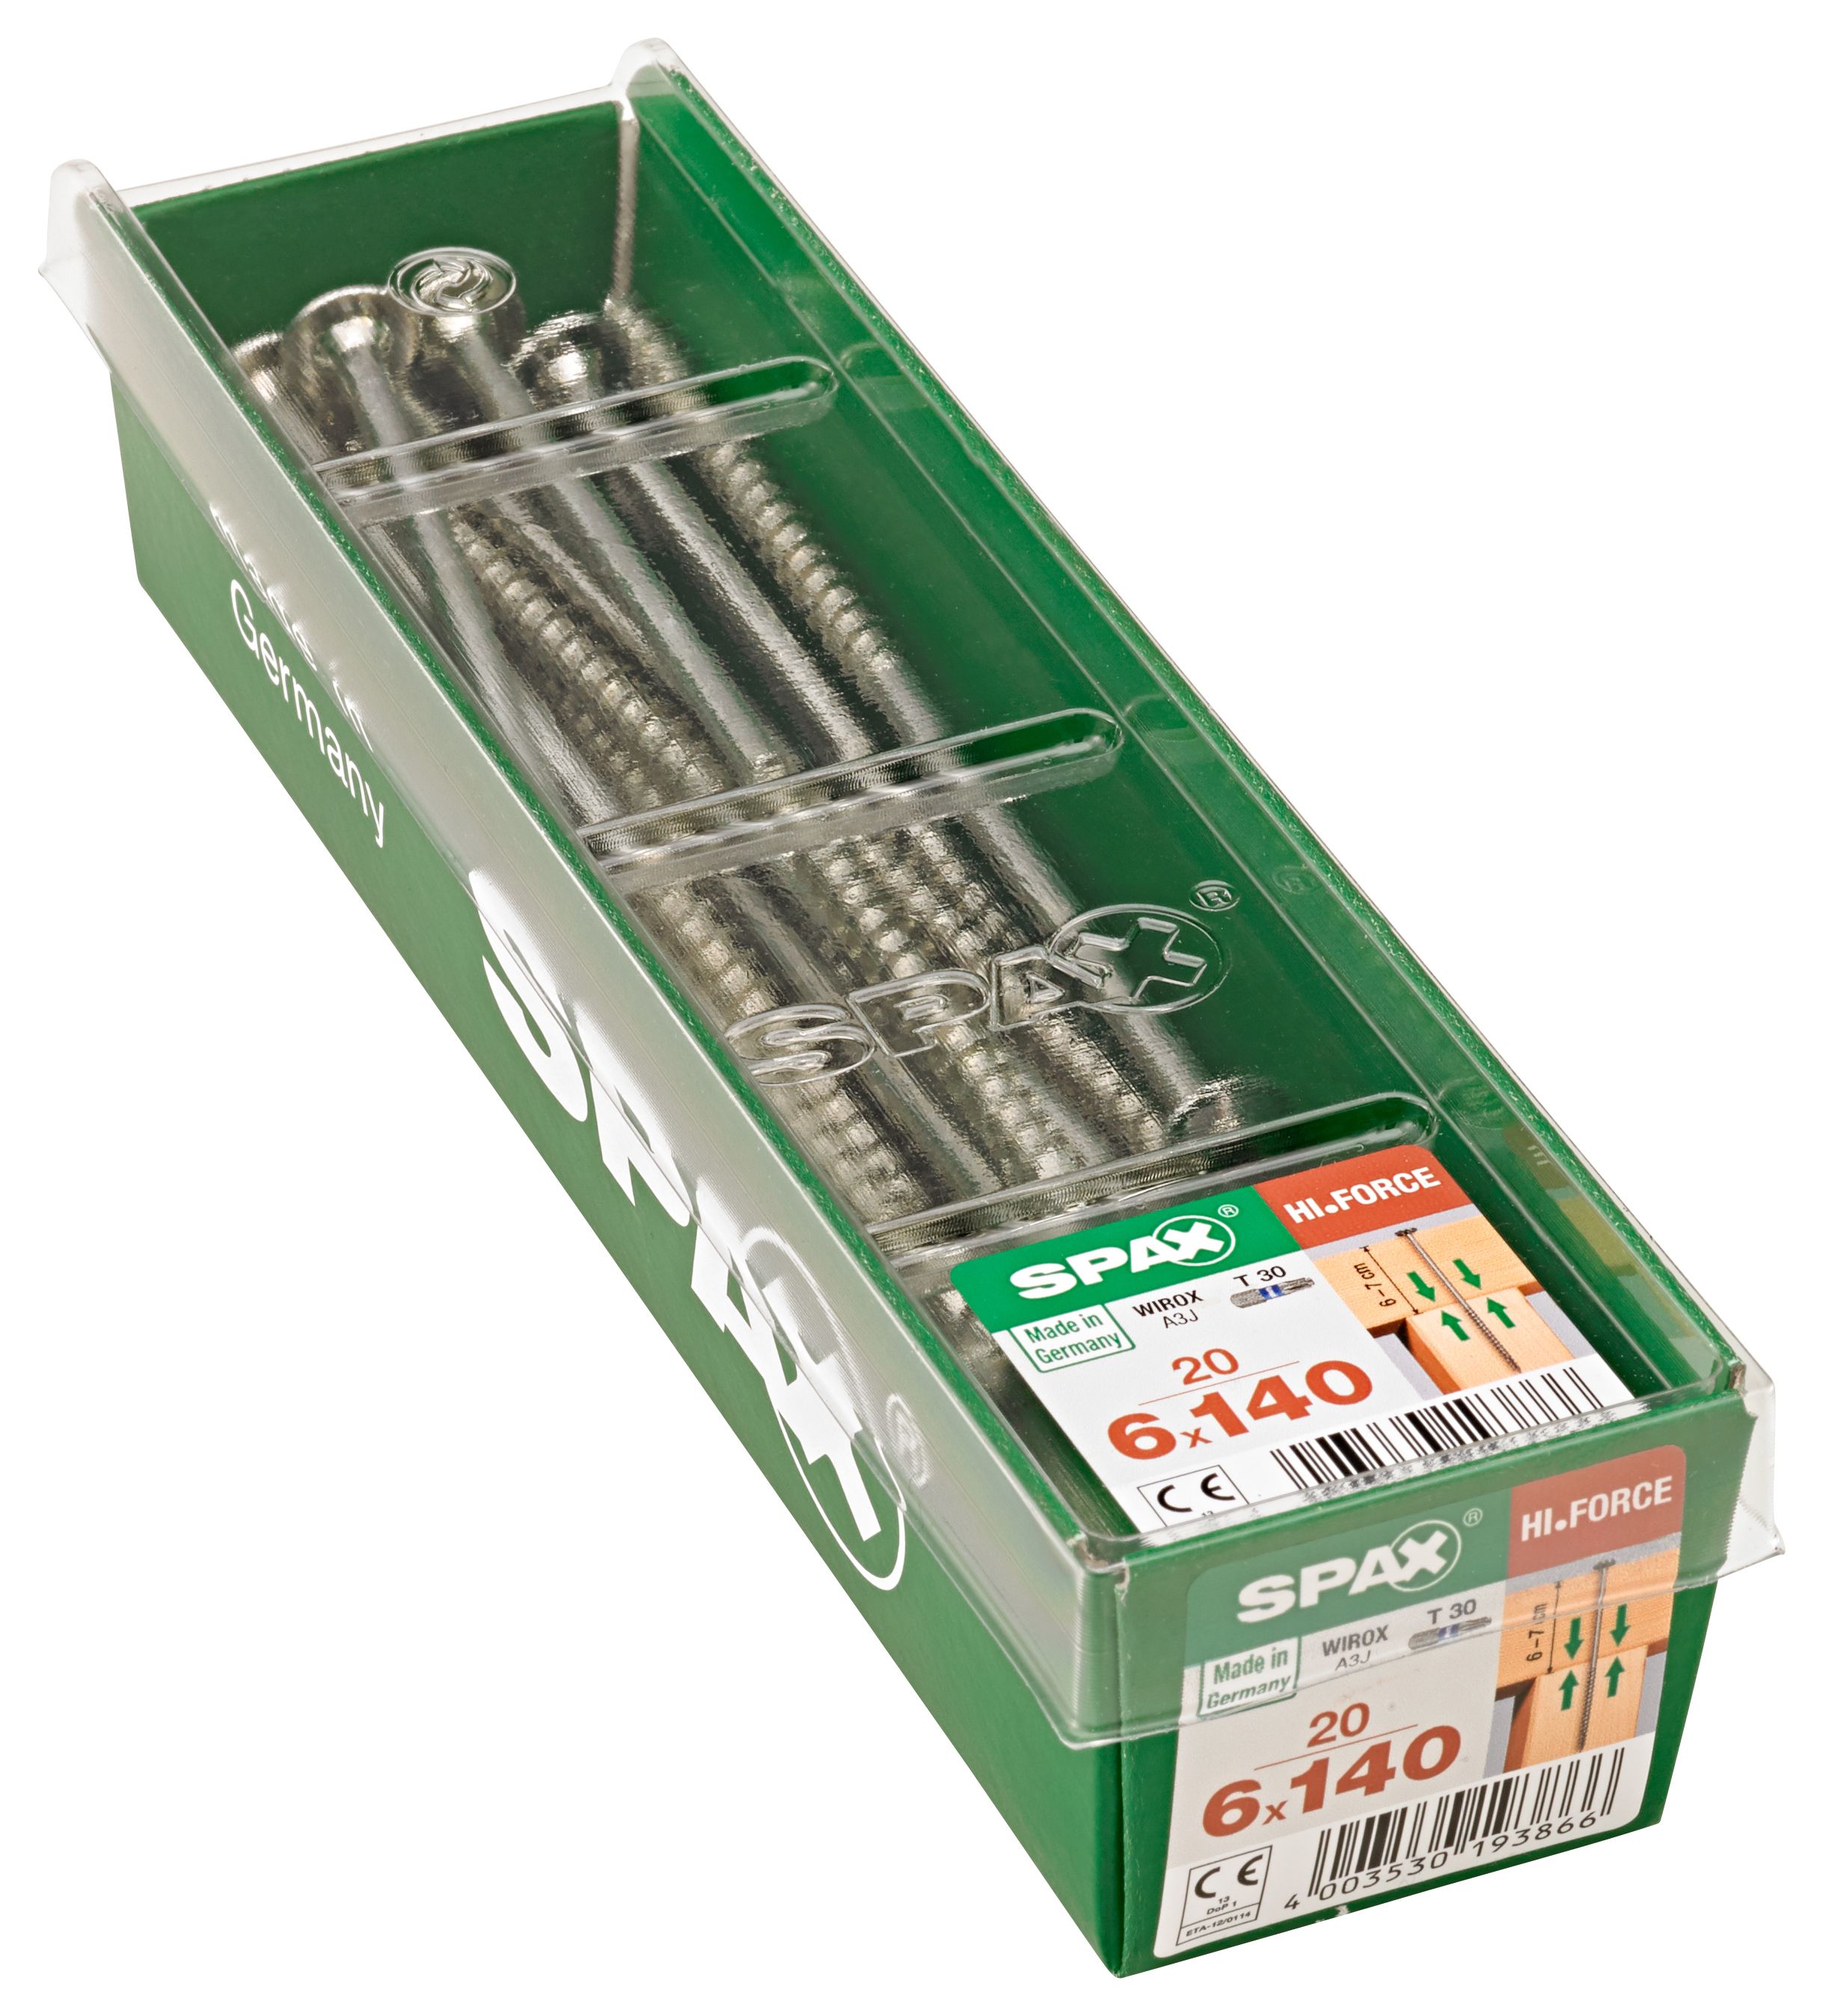 Image of Spax TX Washer-Head Wirox Screws - 6 x 140mm Pack of 20